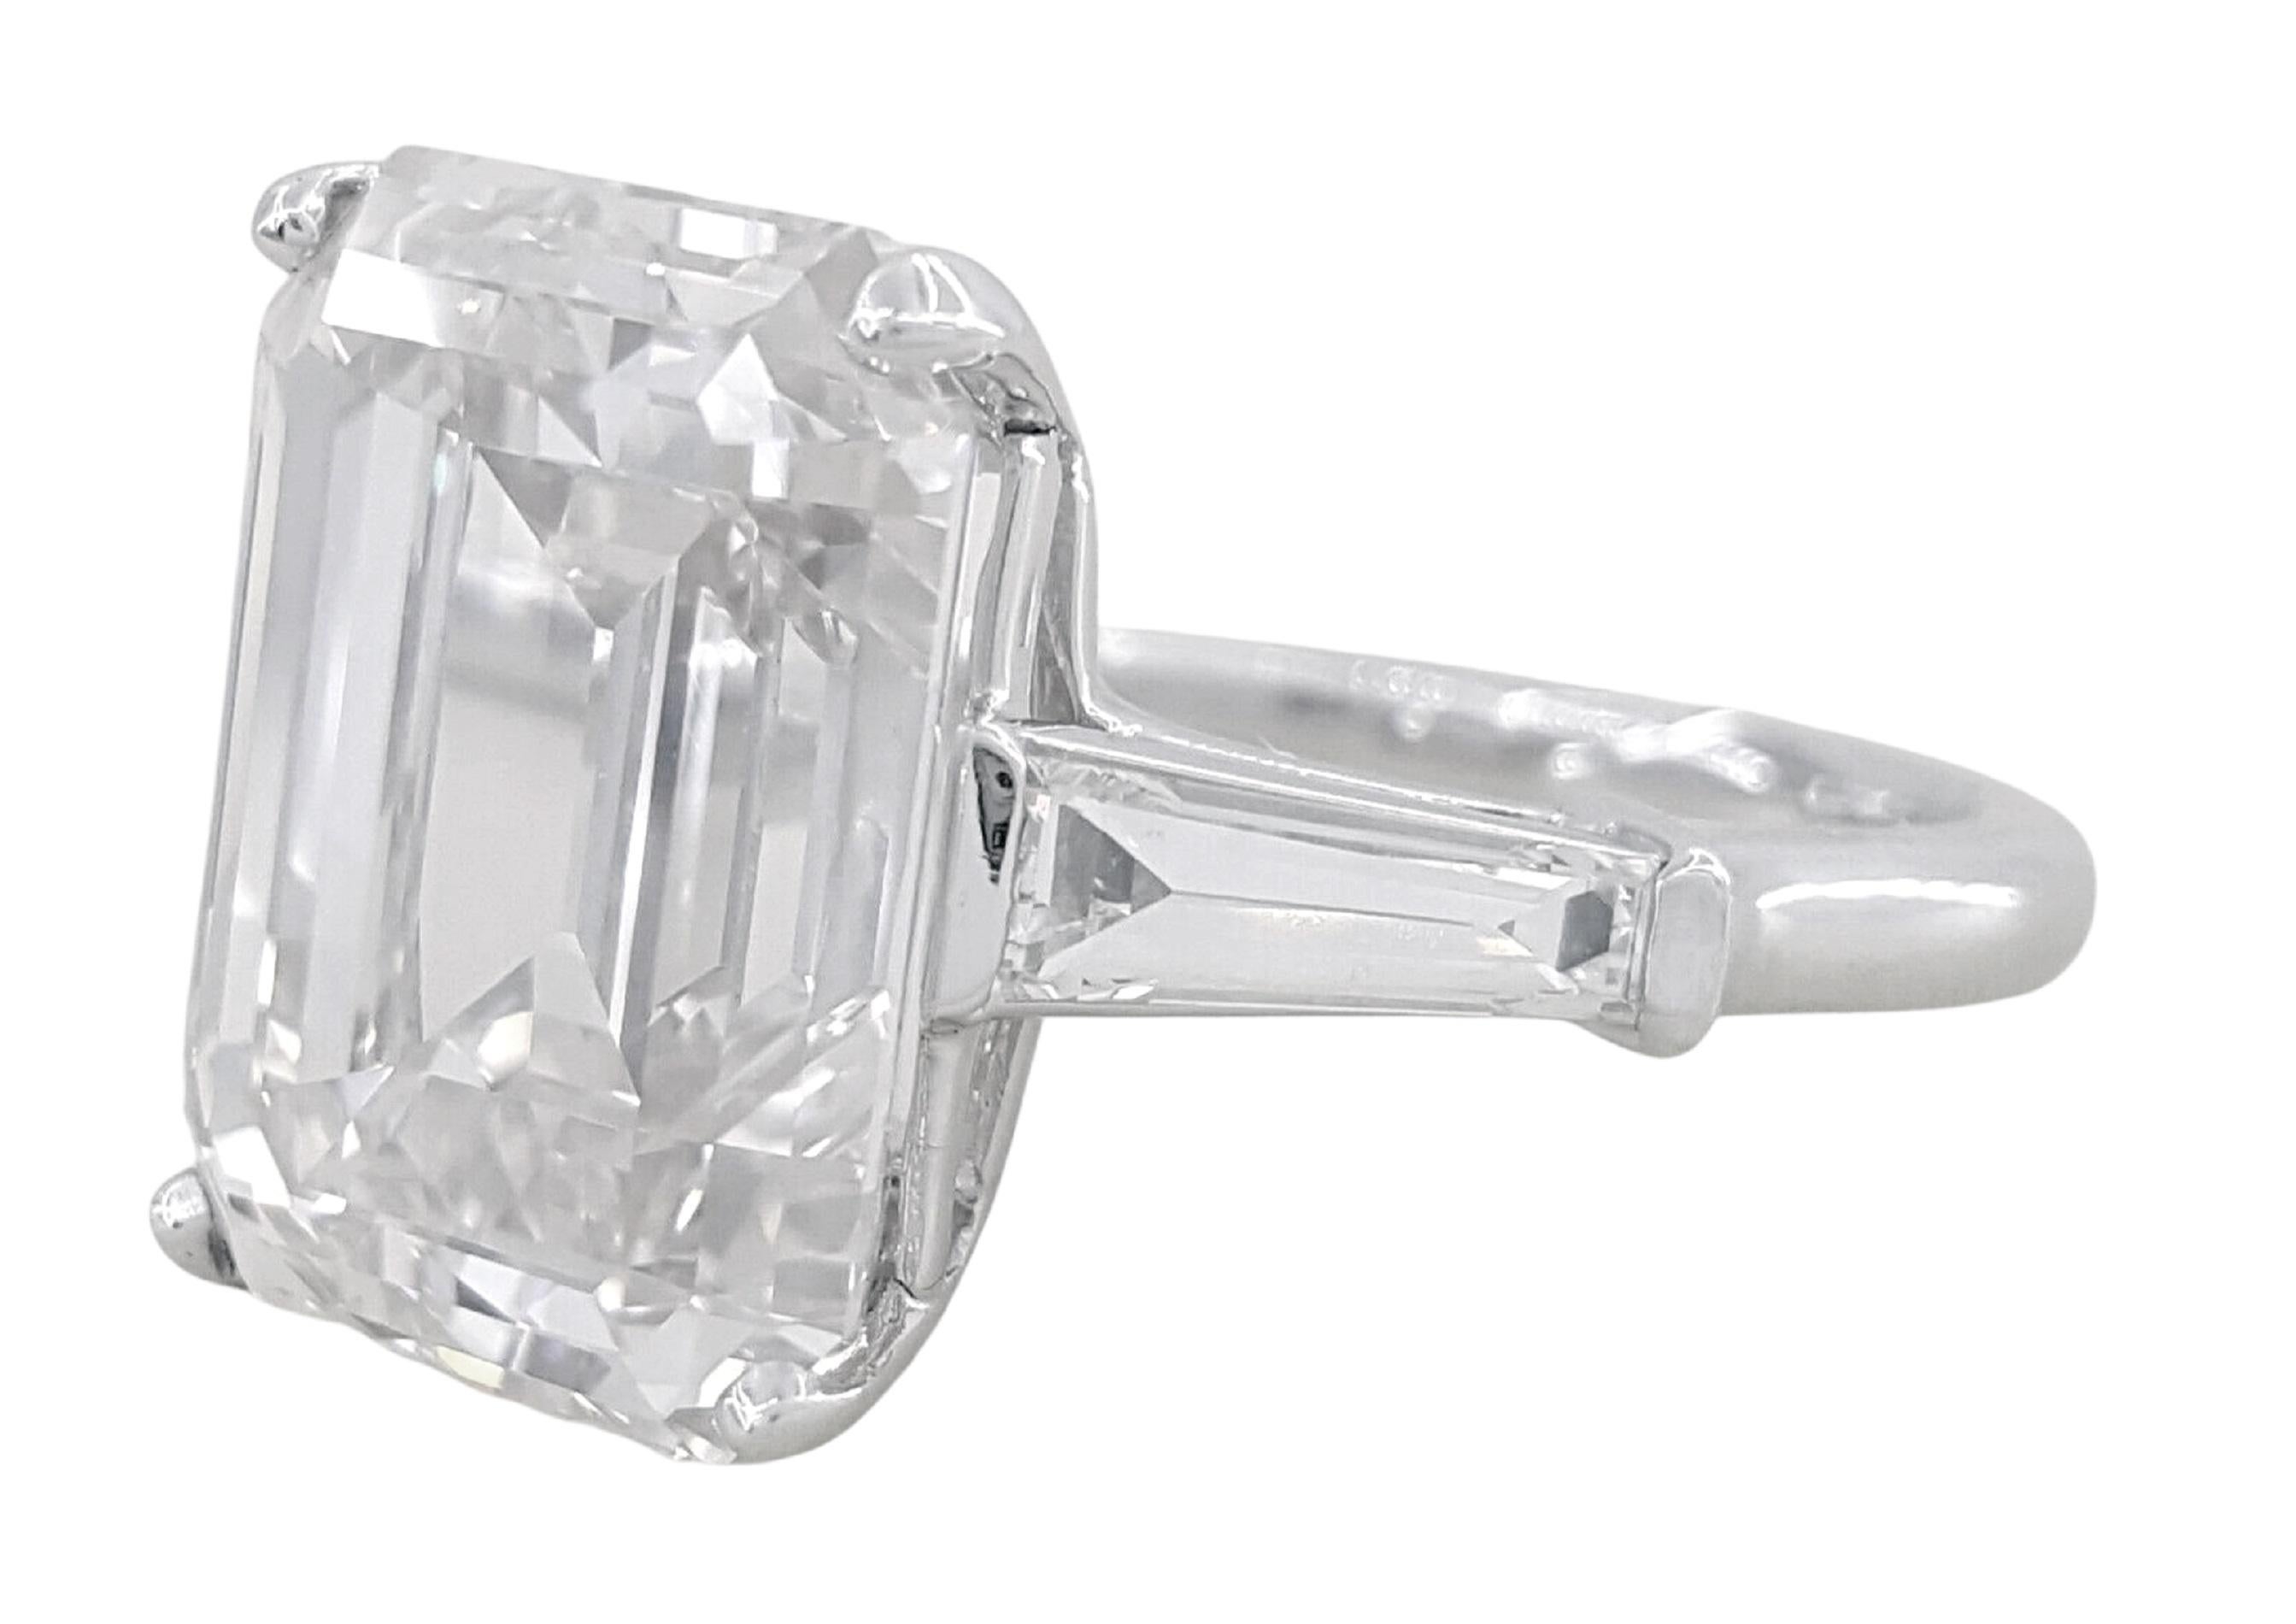 An exquisite 4 carat 
emerald cut diamond
internally flawless clarity
d color
excellent polish
excellent symmetry none fluorescence